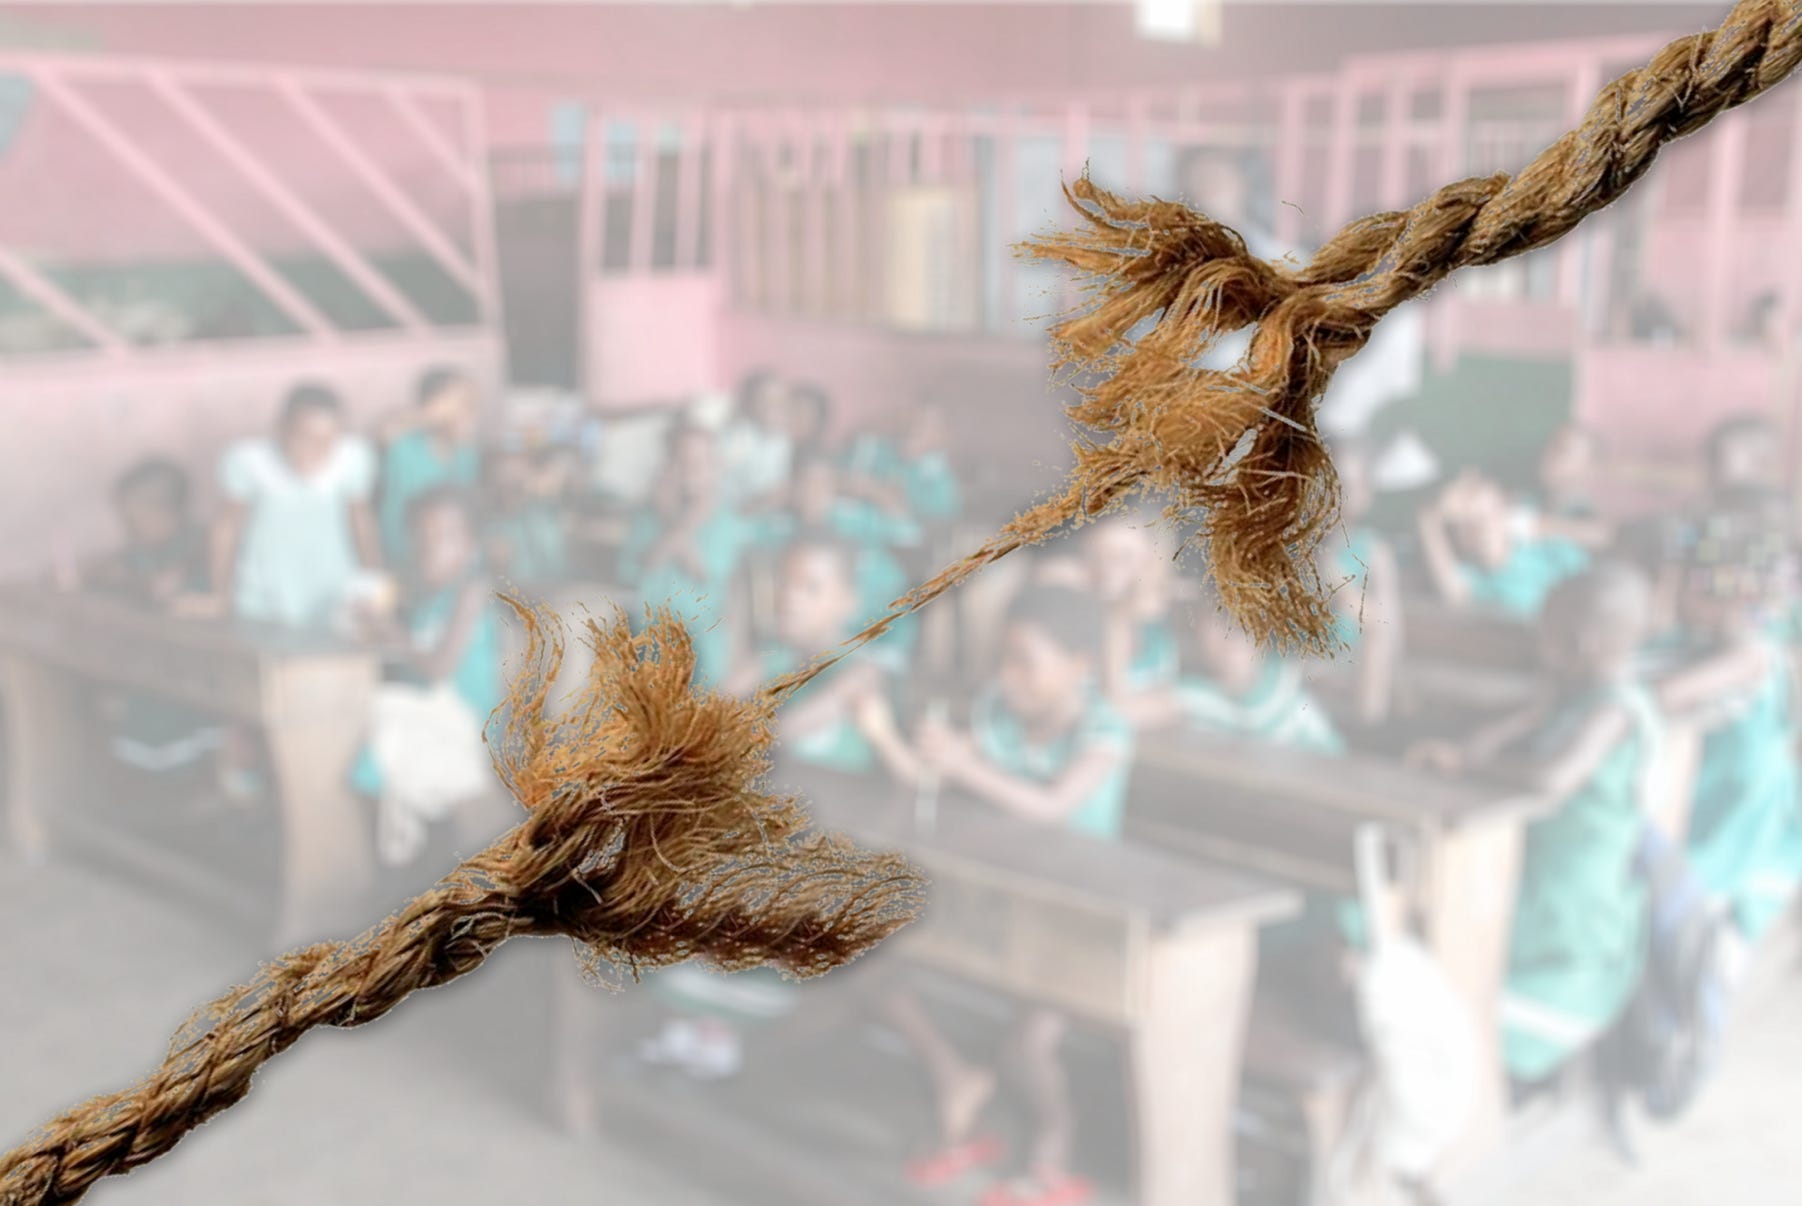 A fraying rope in front of a class of students in Accra (Ghana) symbolises the fragile nature of trust in educational settings.